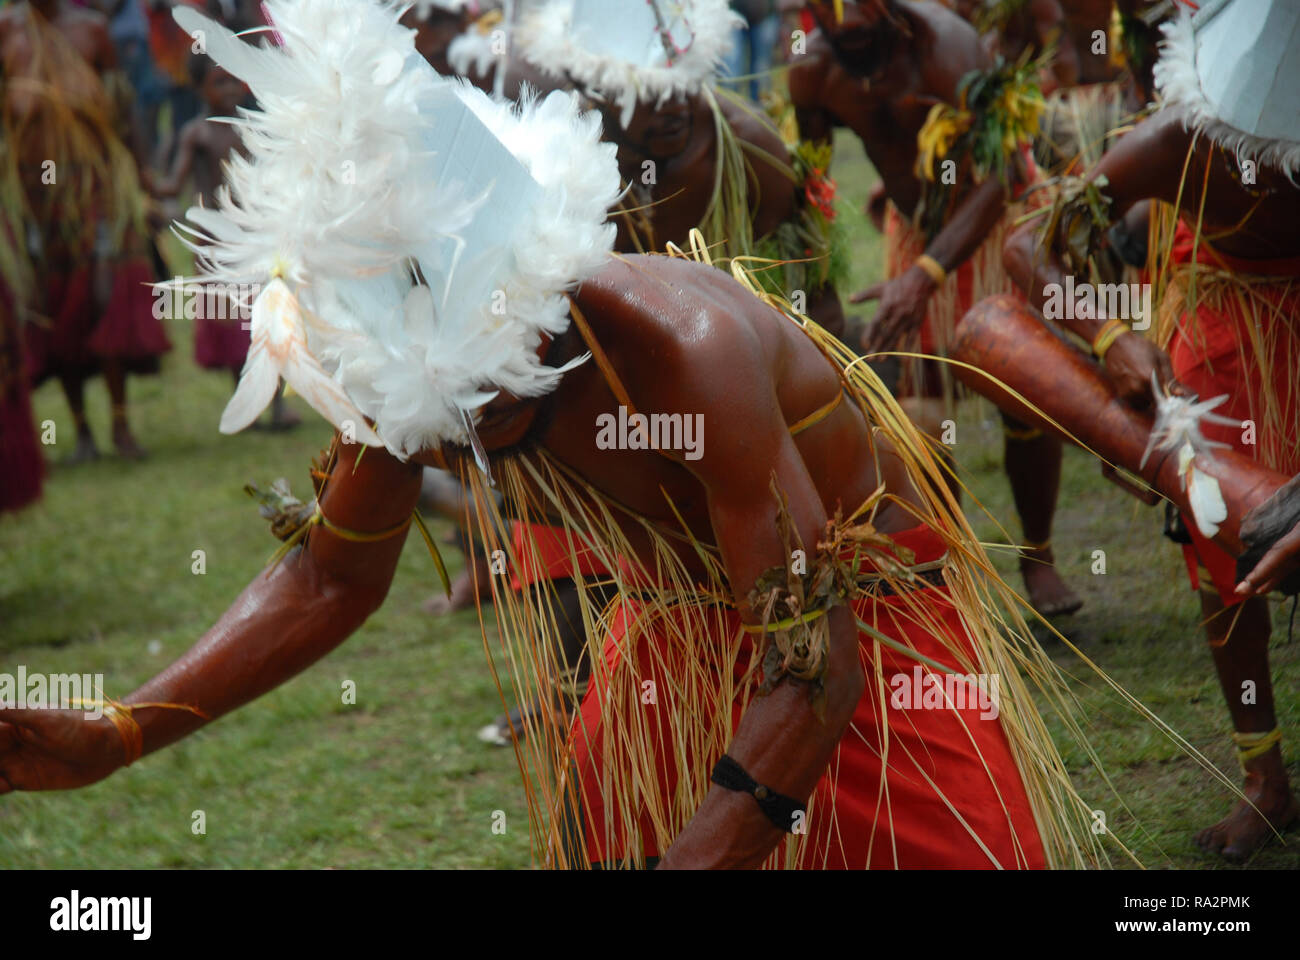 Colourfully dressed and face painted men wearing boat hats dancing as part of a Sing Sing in Madang, Papua New Guinea. Stock Photo